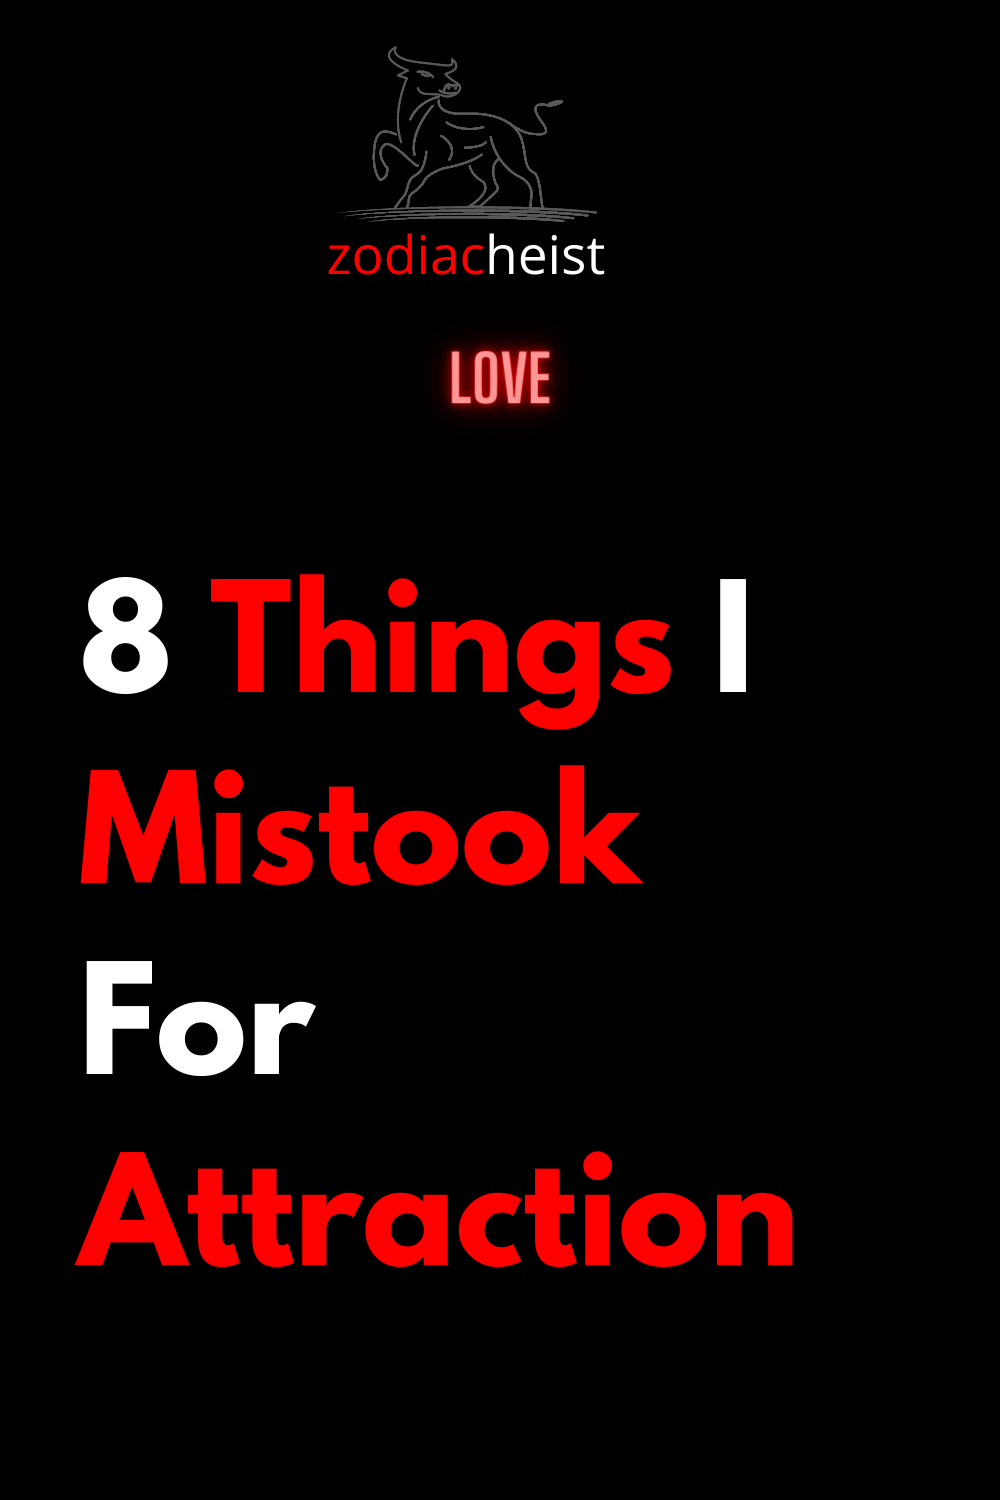 8 Things I Mistook For Attraction